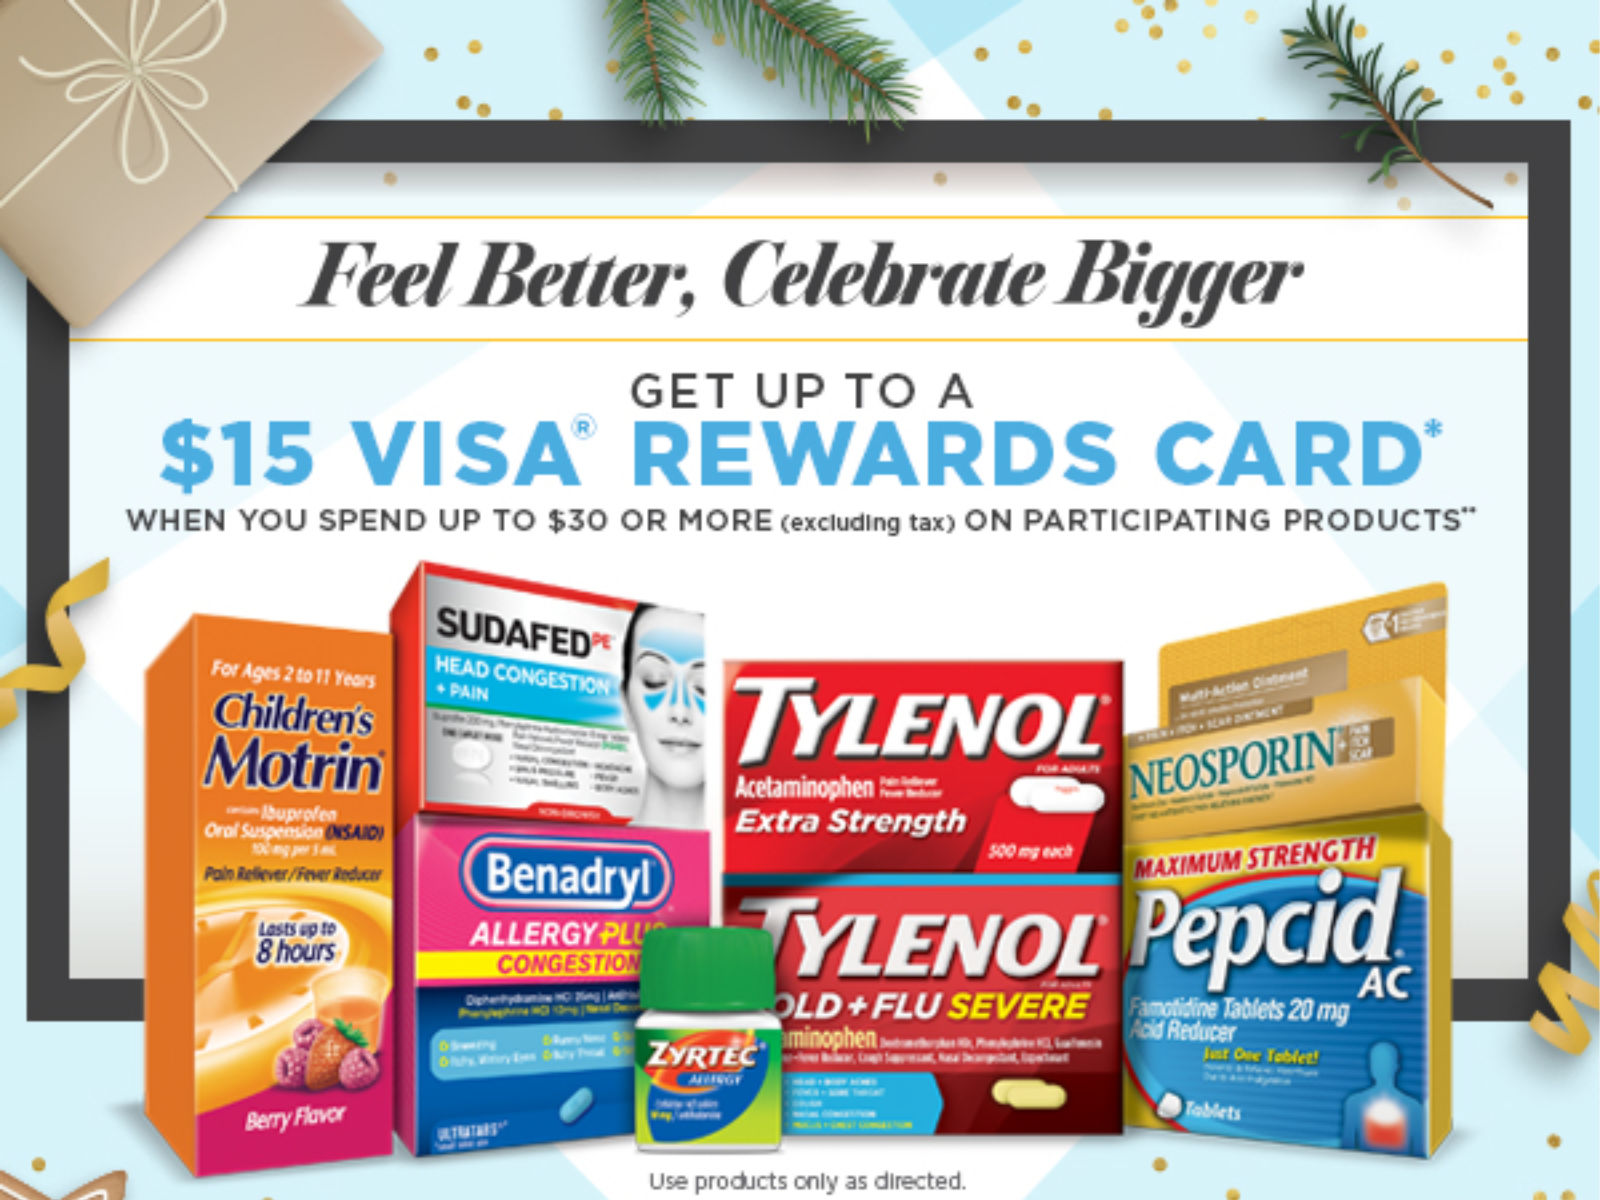 Feel Better & Celebrate Bigger – New Promo From Johnson & Johnson Means A Big Reward With Purchase!